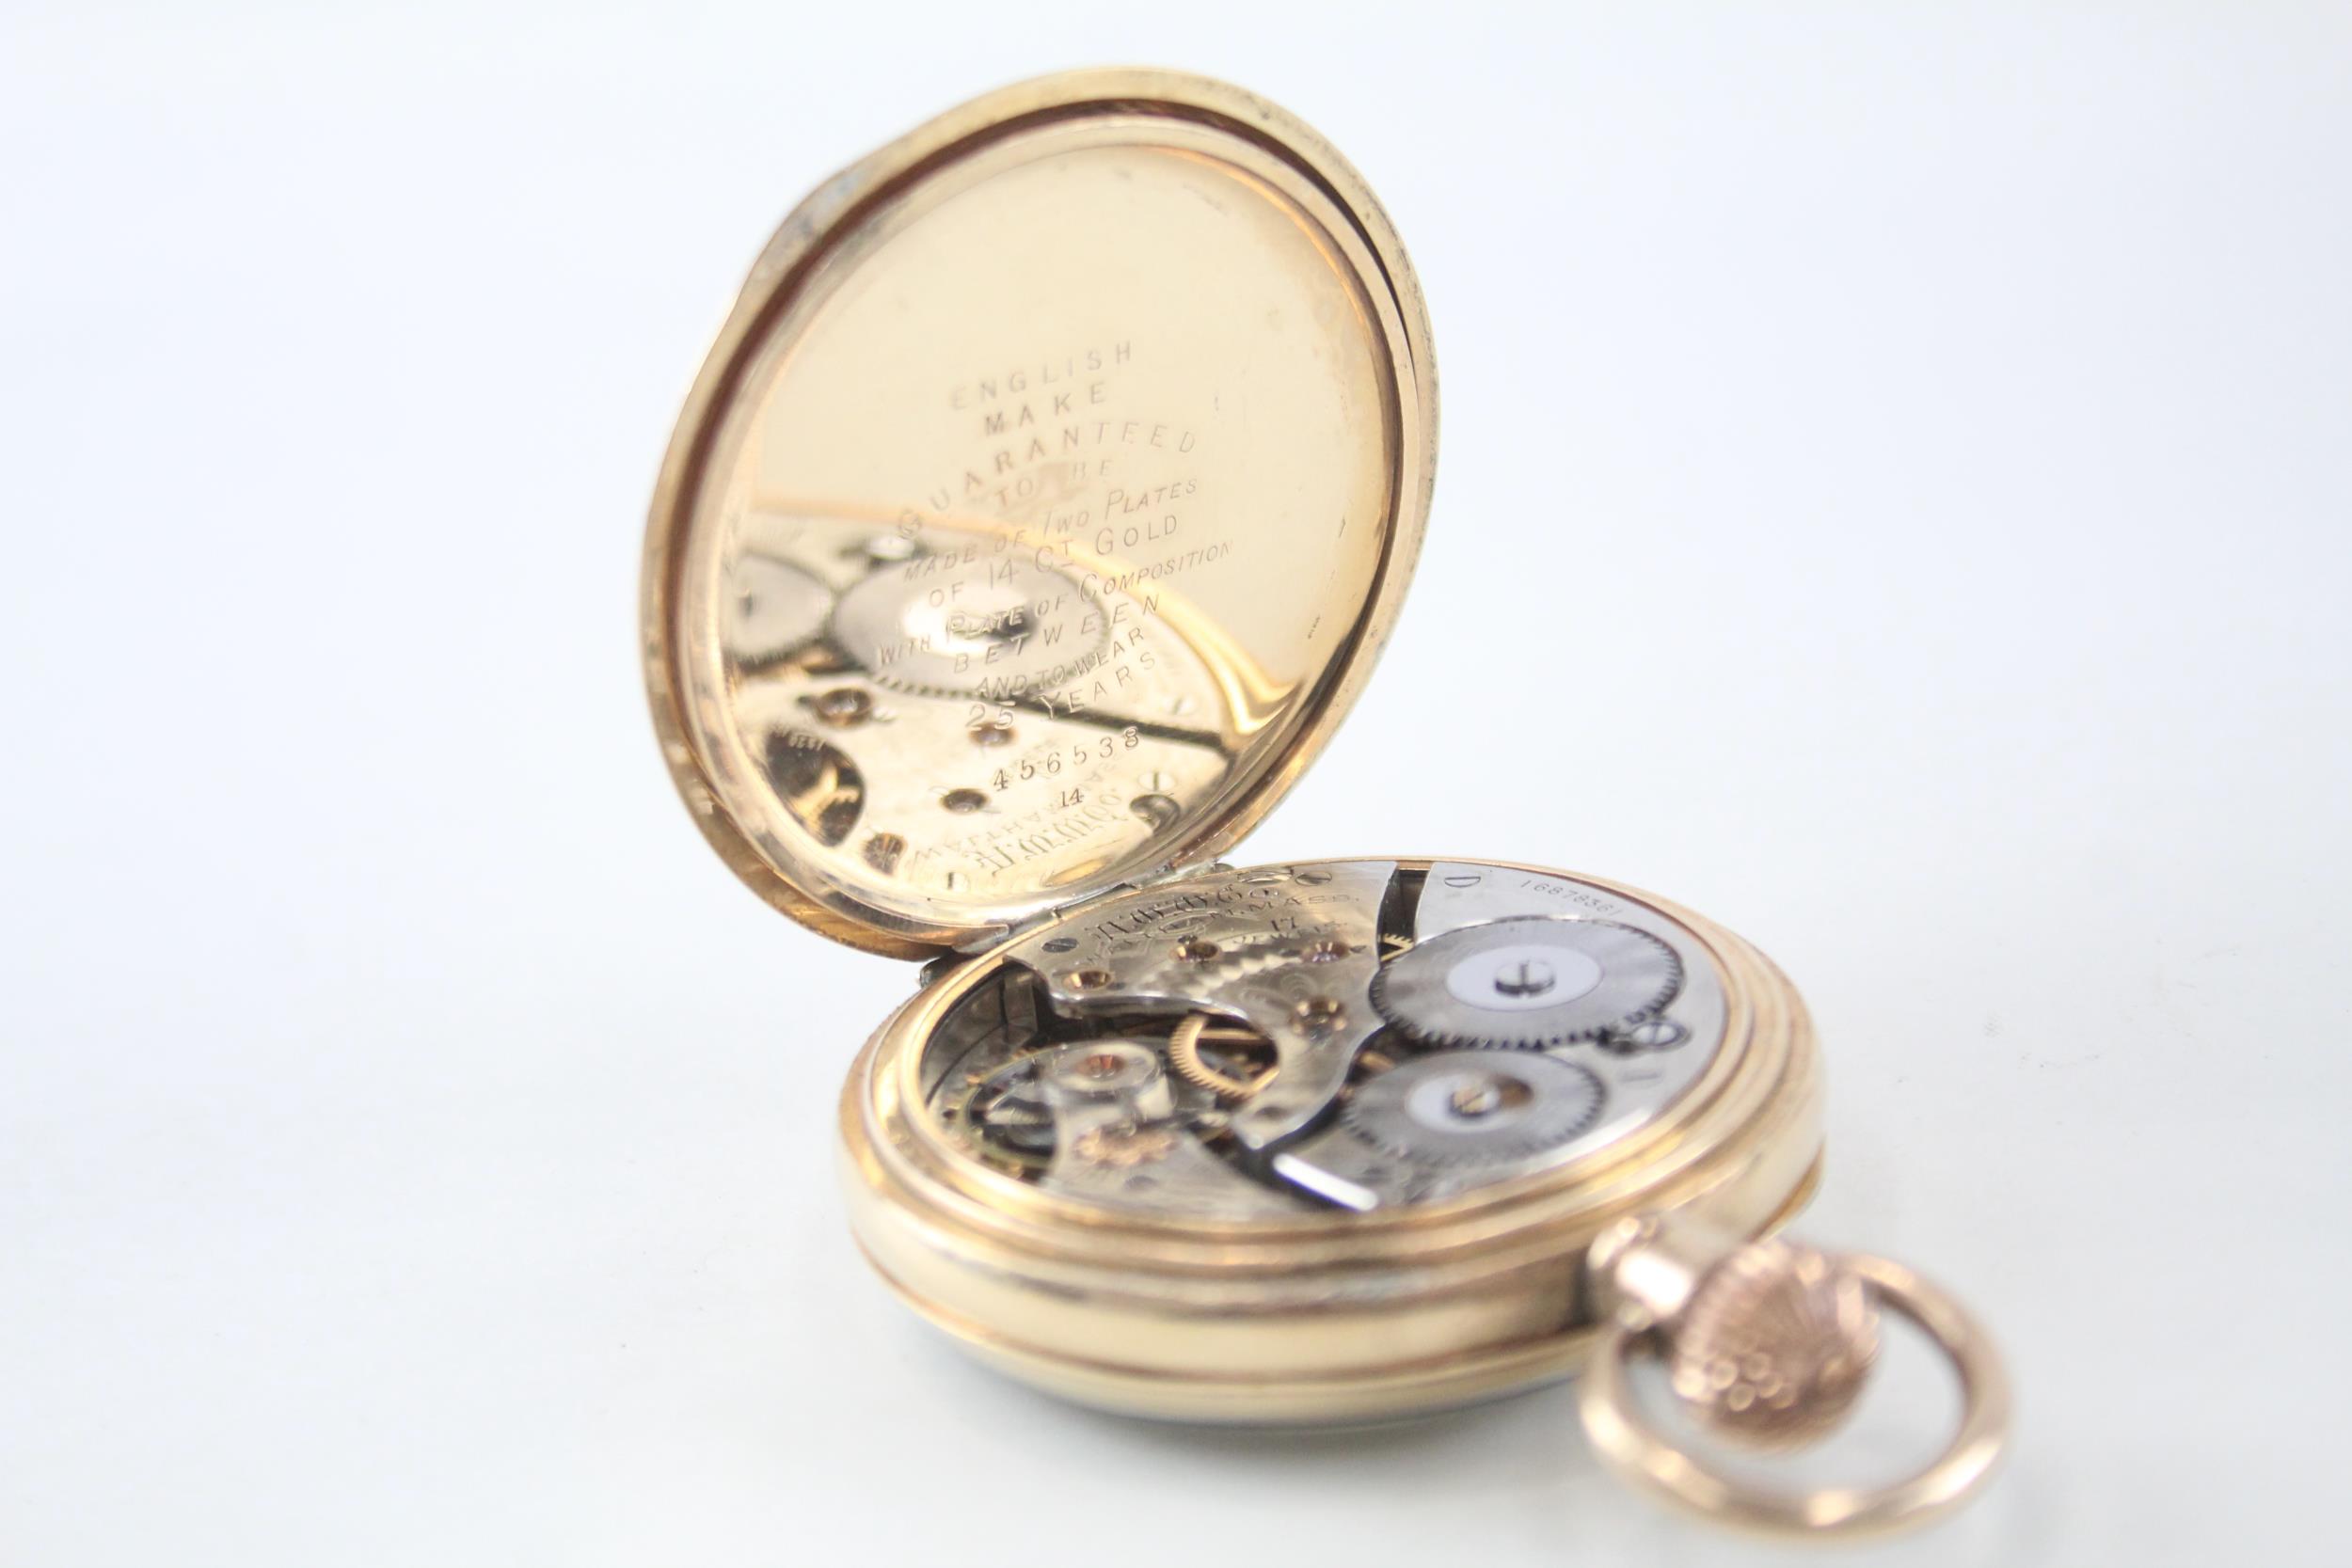 WALTHAM Gents Rolled Gold Open Face Pocket Watch Hand-wind WORKING - WALTHAM Gents Rolled Gold - Image 4 of 5